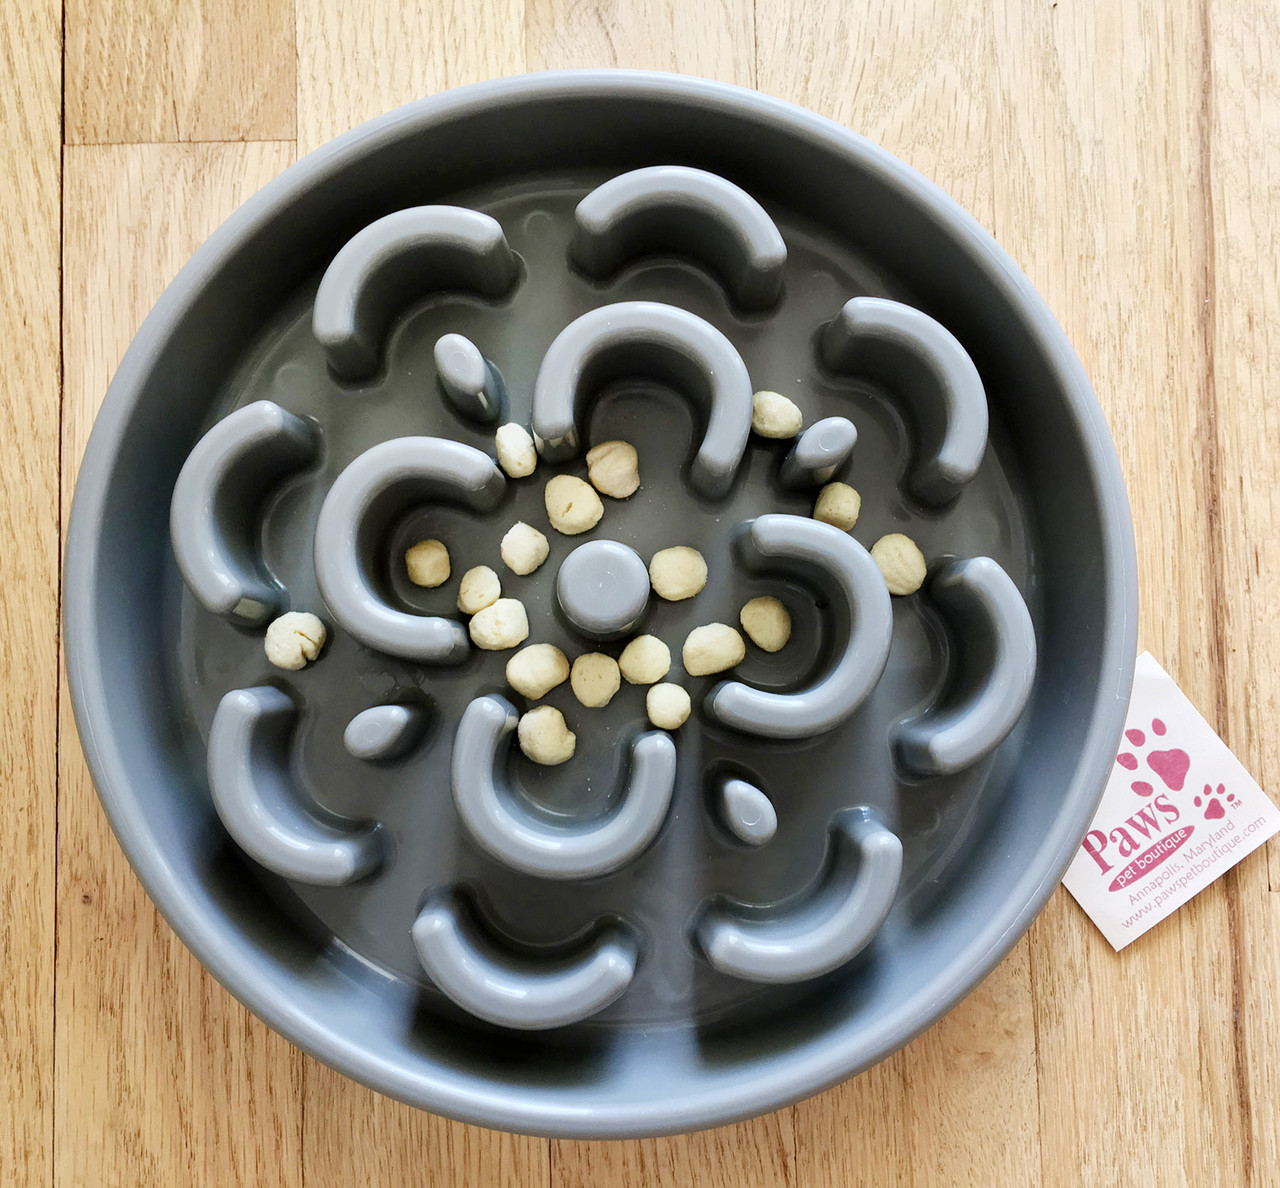 https://cdn11.bigcommerce.com/s-53033/images/stencil/1280x1280/products/5584/7066/slow_feeder_gray_flower_dog_bowl_W__03123.1557407601.jpg?c=2